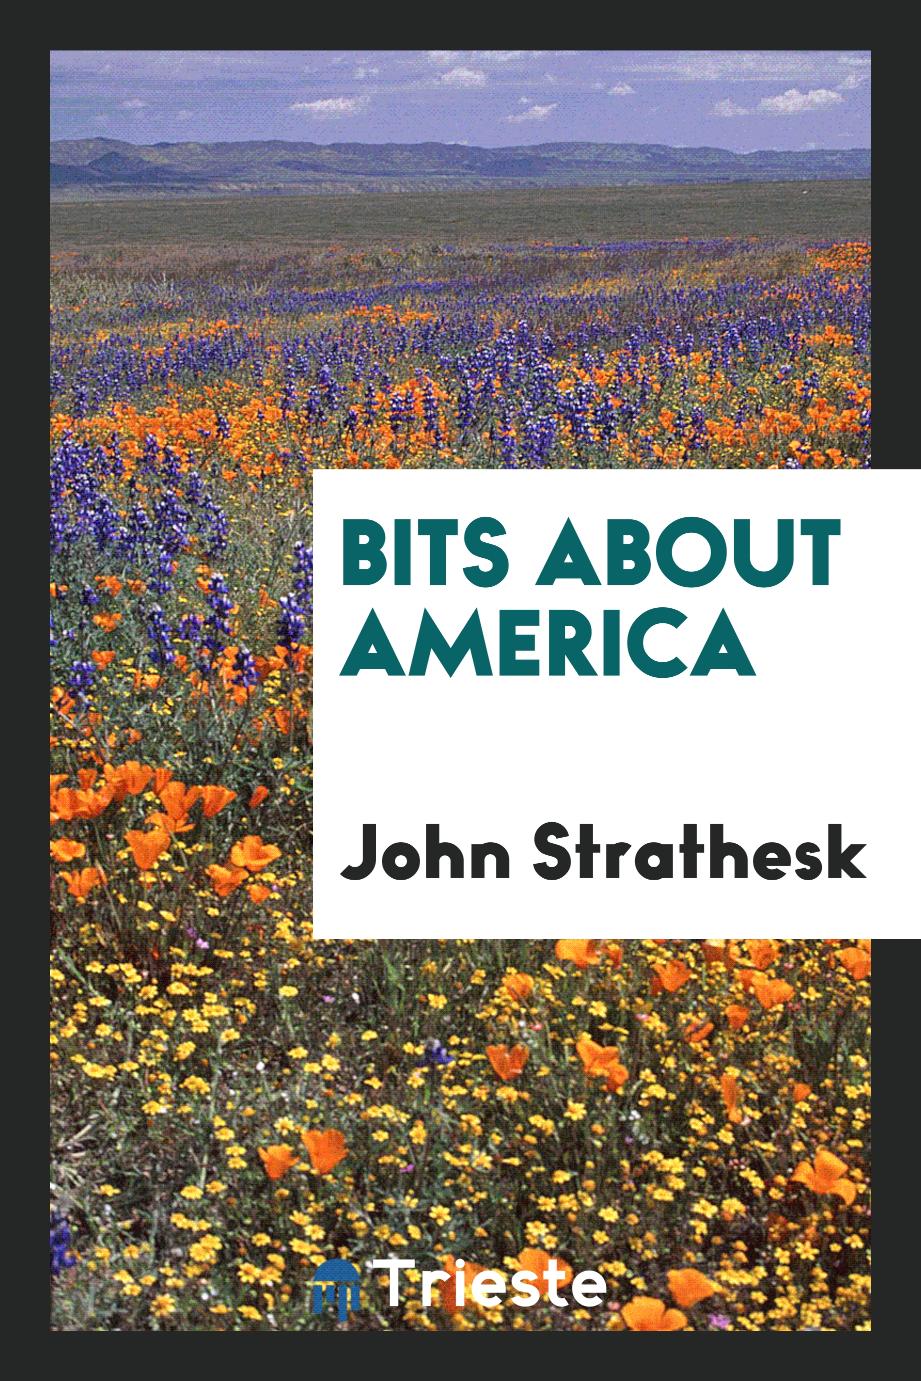 Bits about America